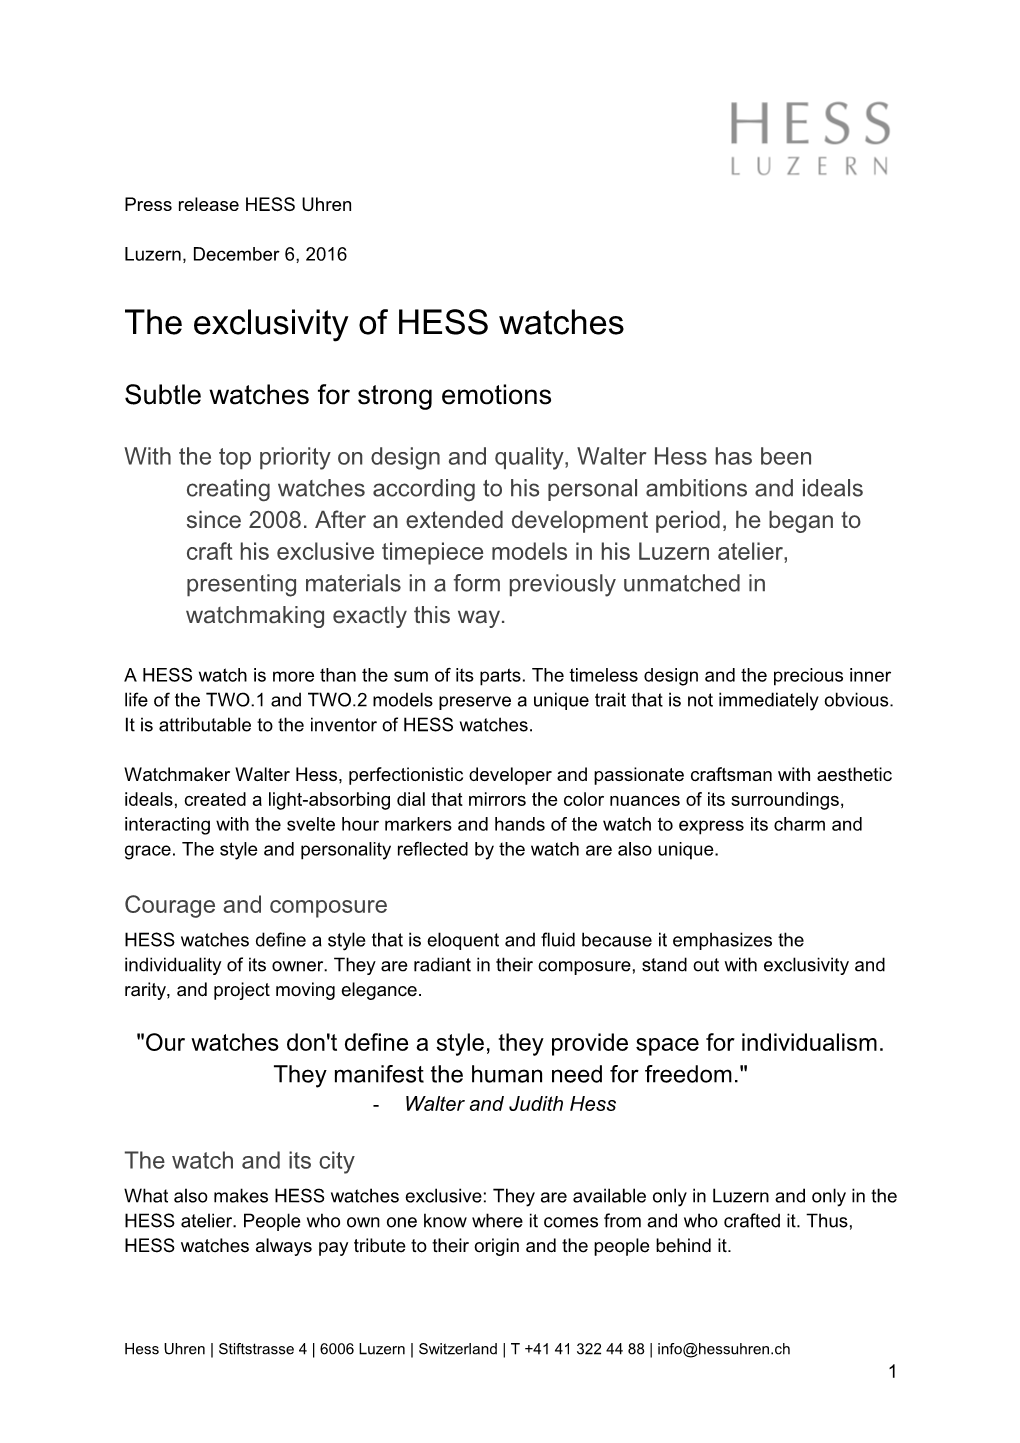 The Exclusivity of HESS Watches